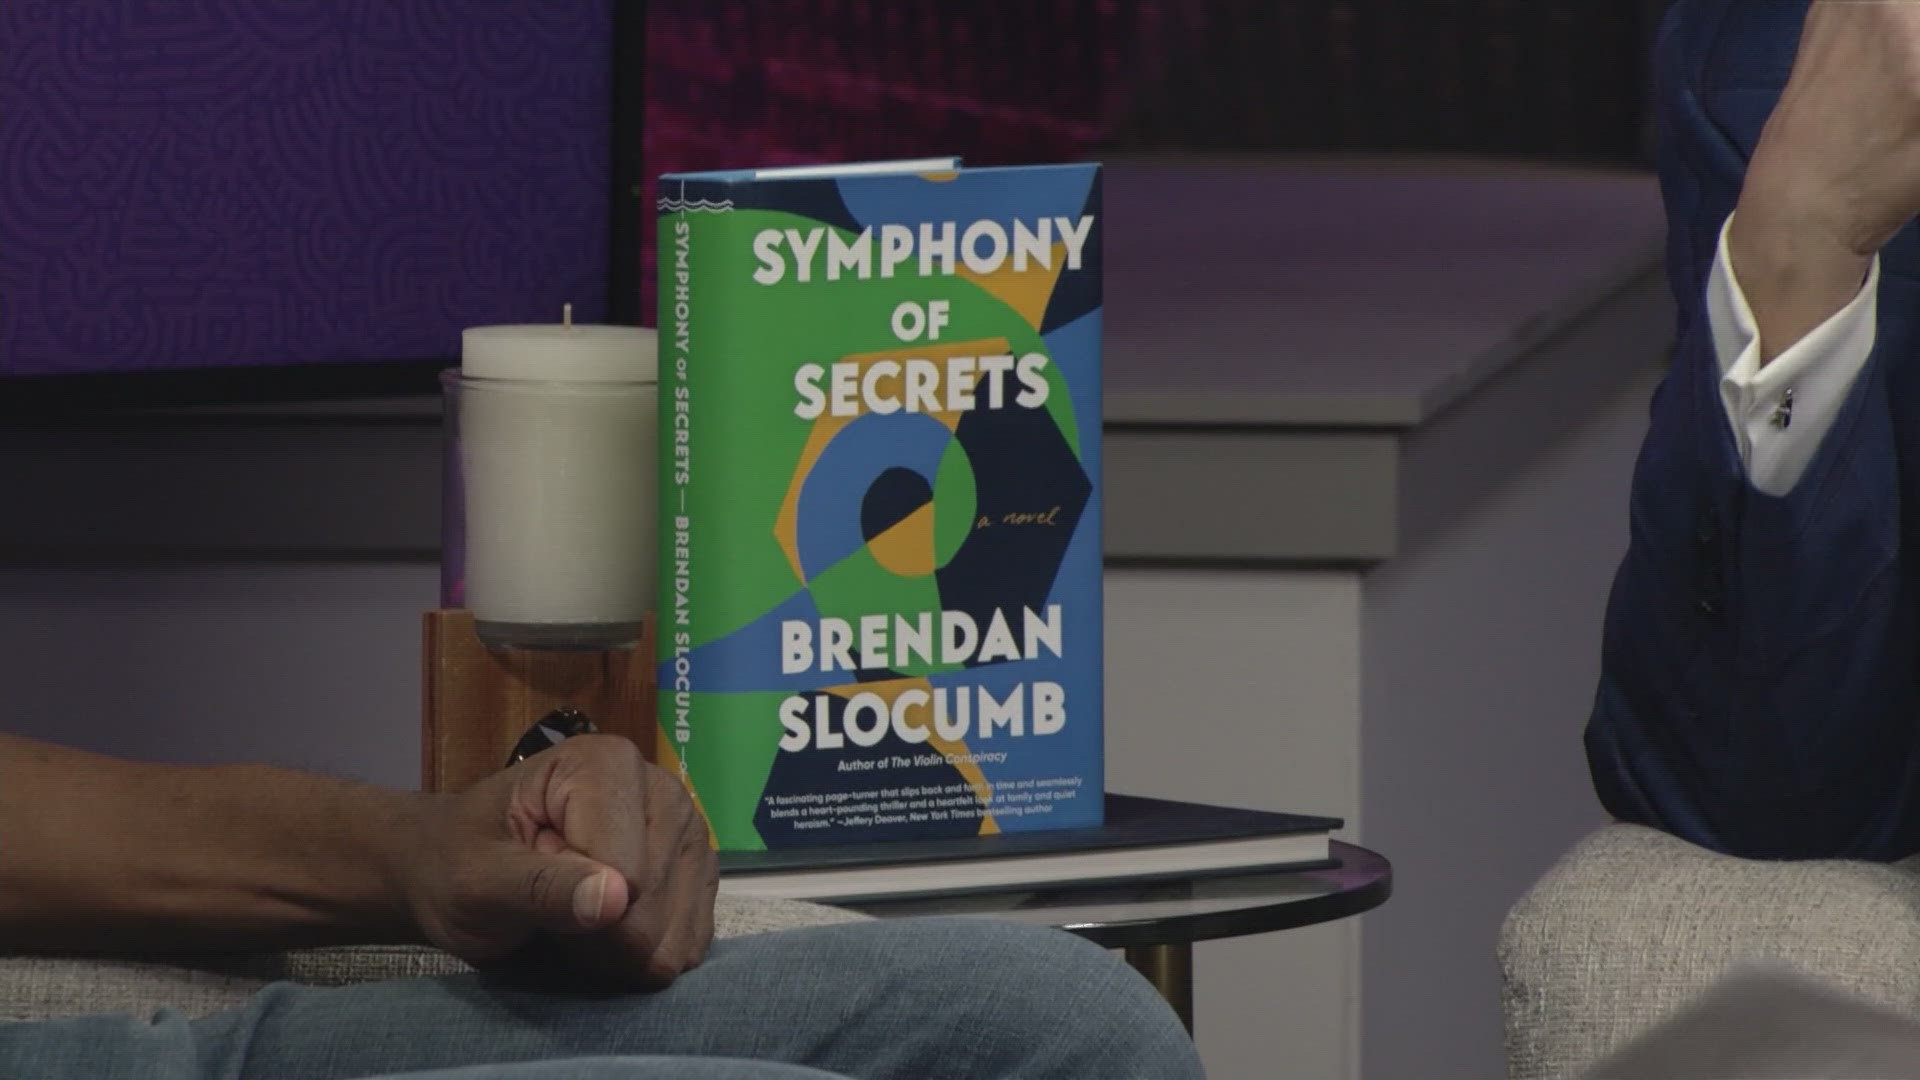 Leon sits down with Brendan Slocumb, author of Symphony of Secrets, his second novel.